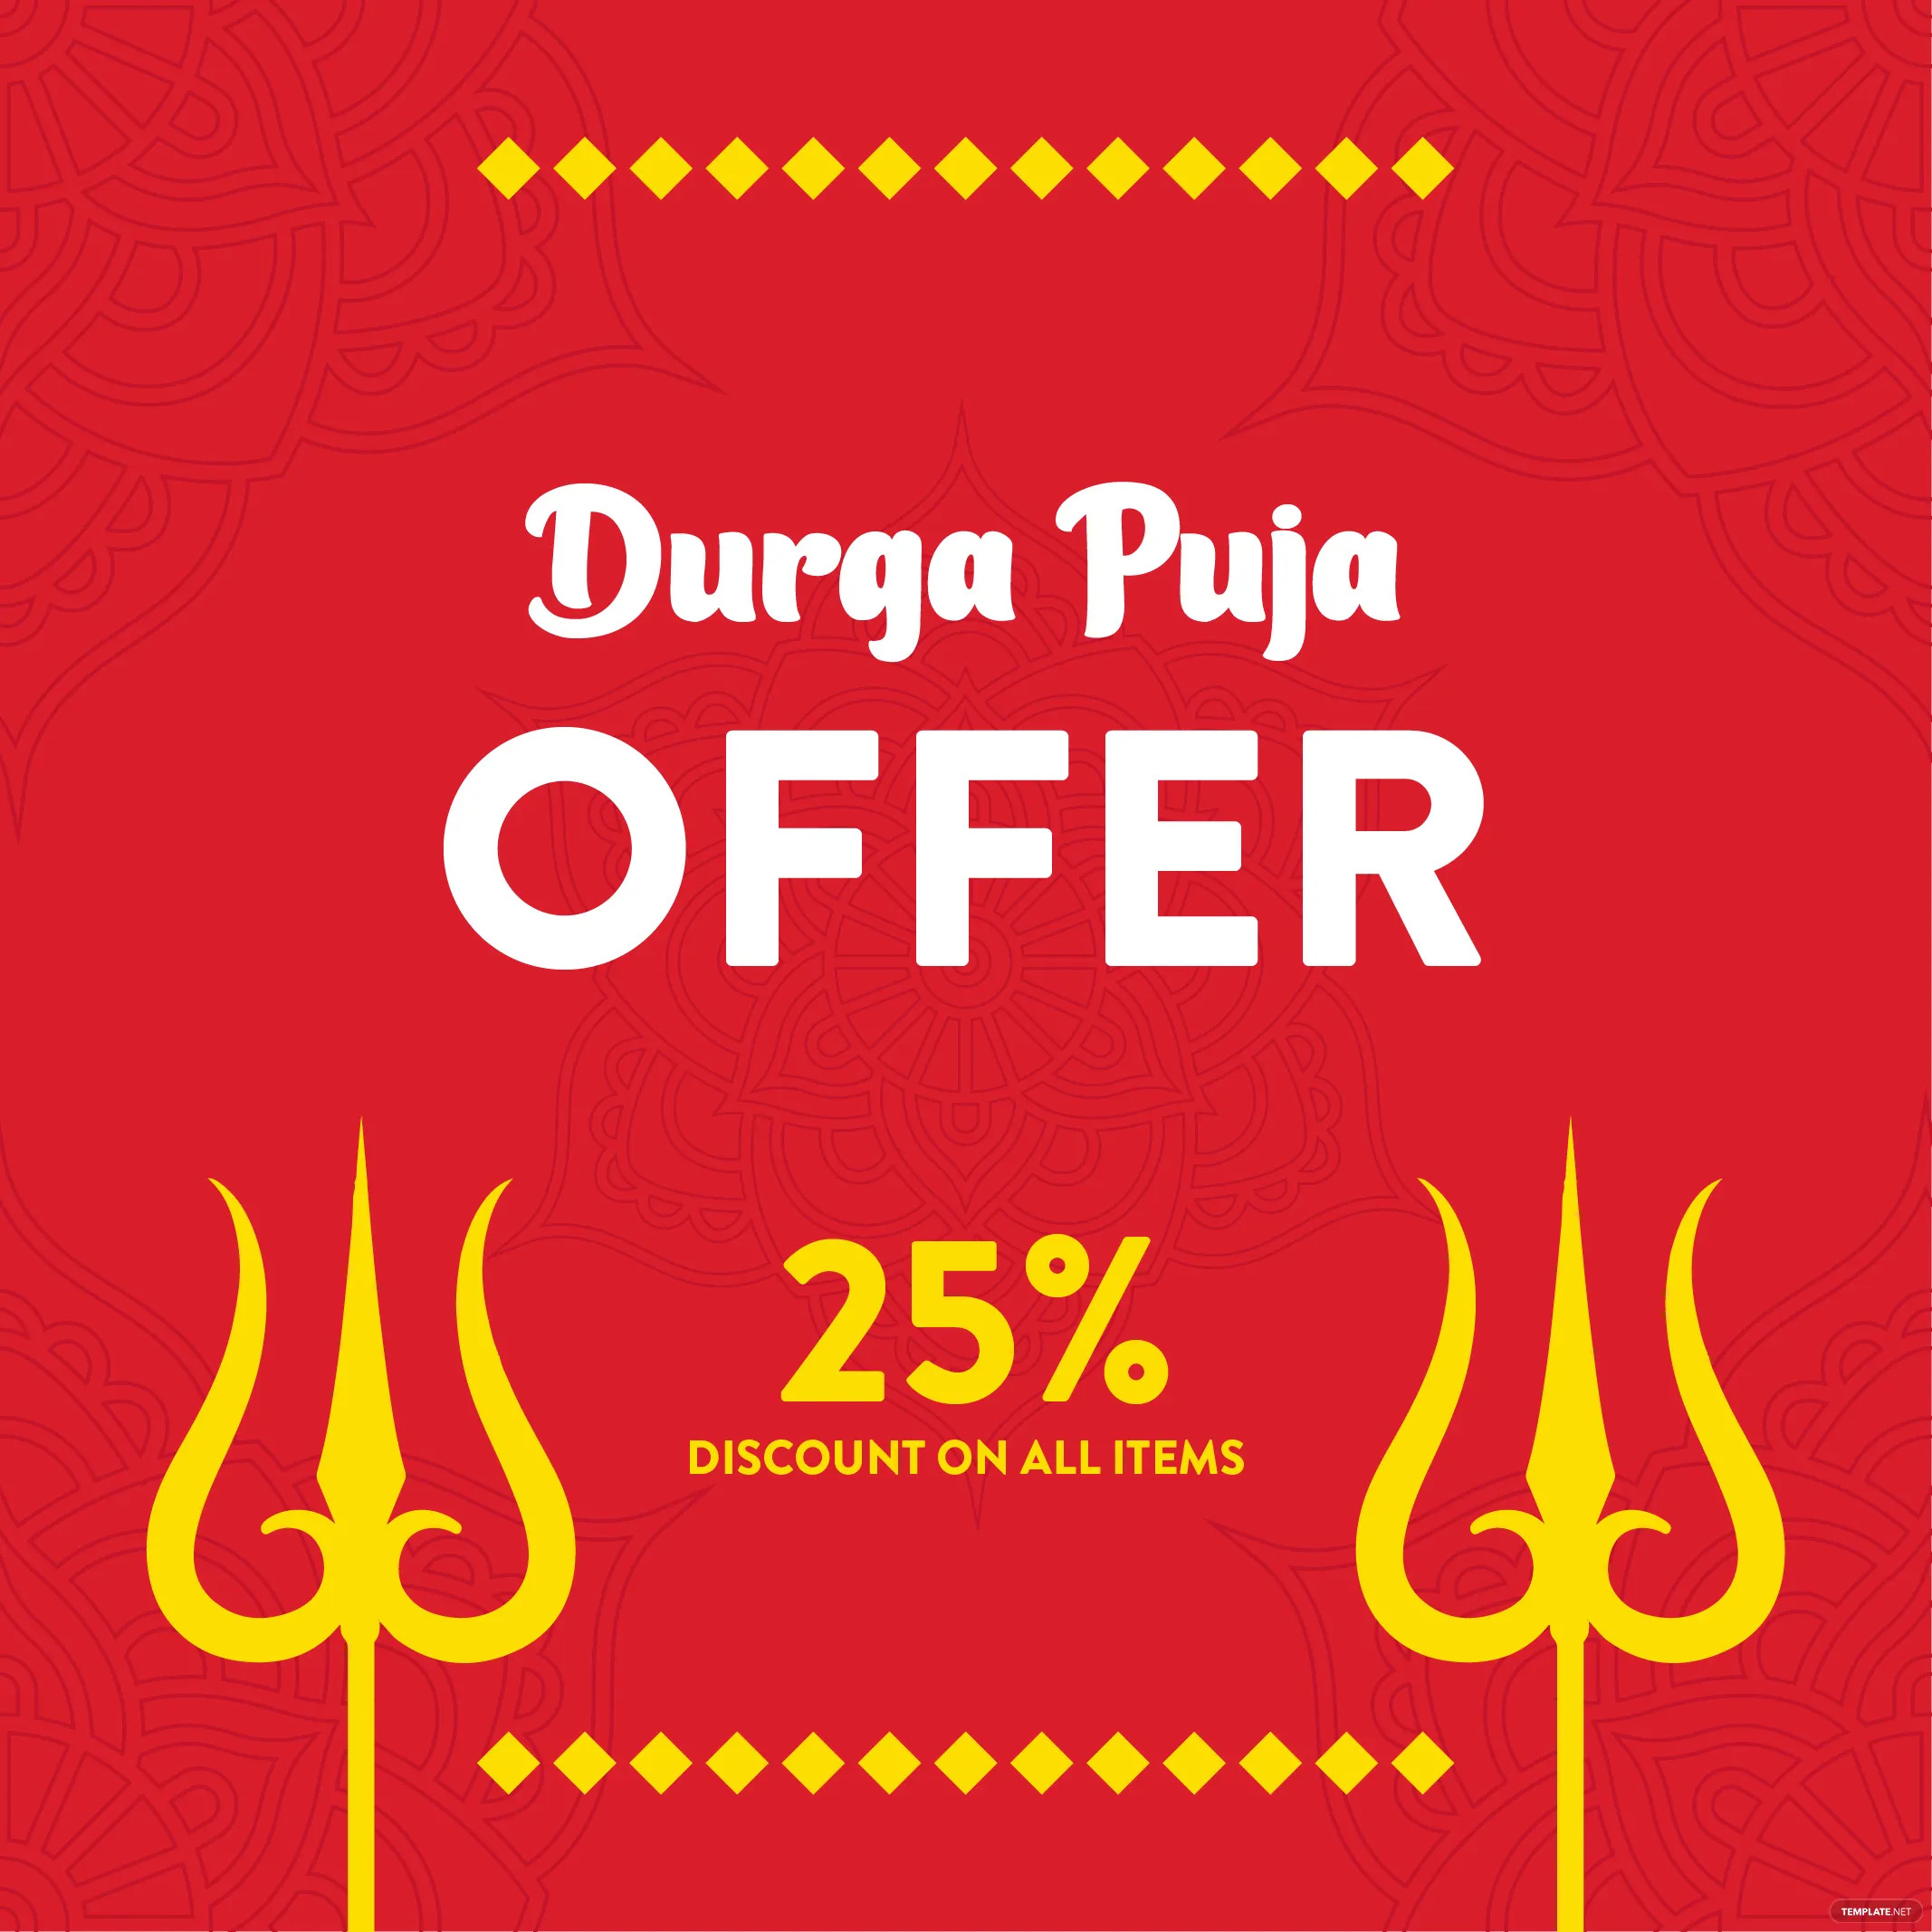 durga puja offer poster ideas examples